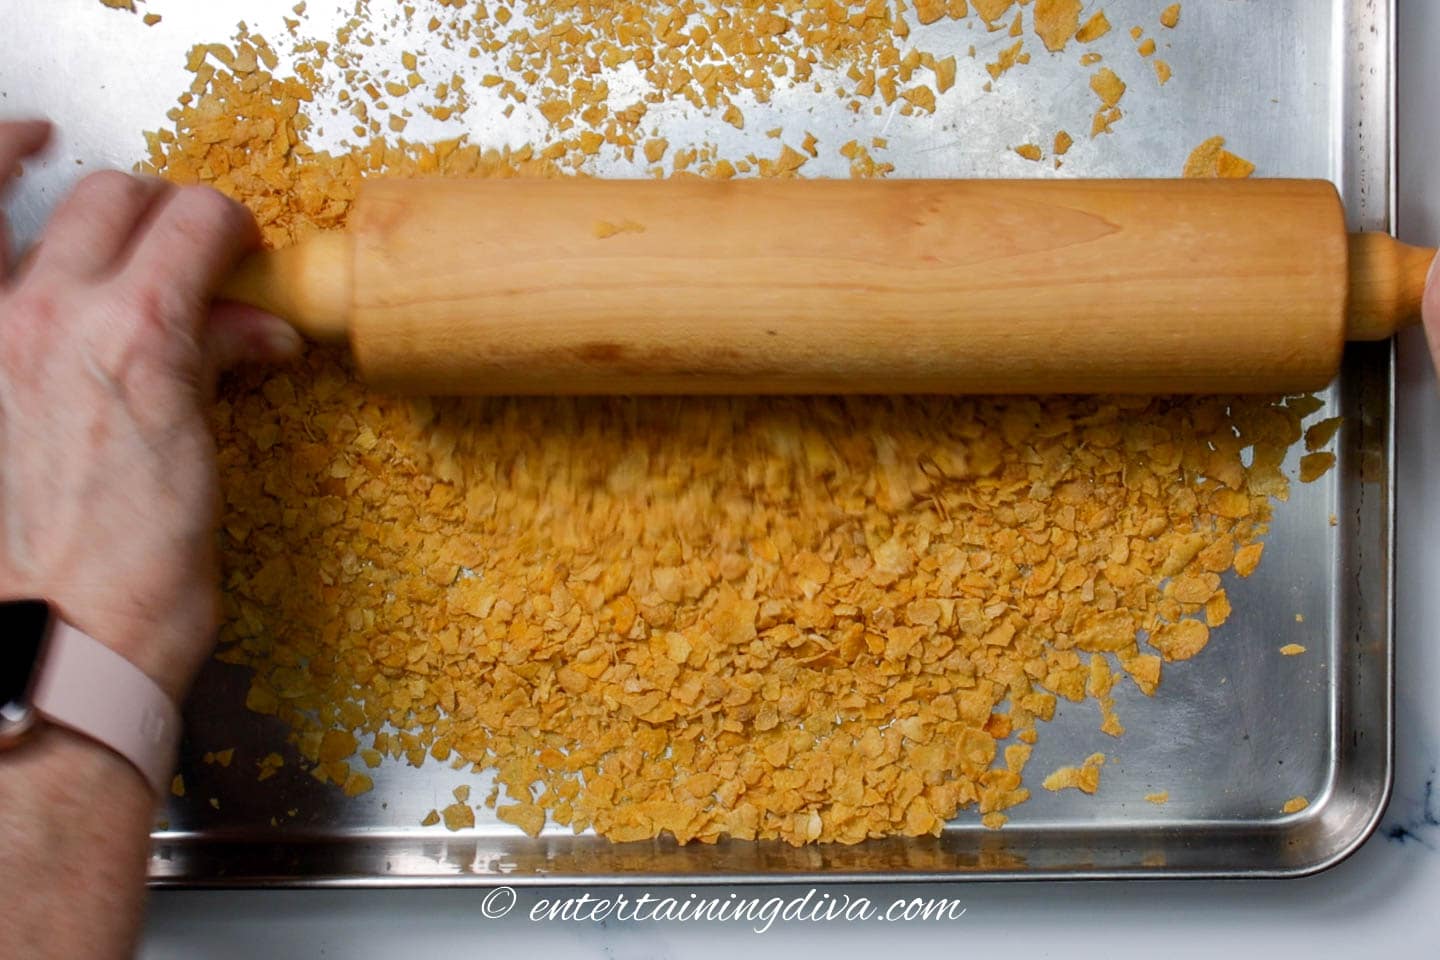 Corn flakes being crushed with a rolling pin